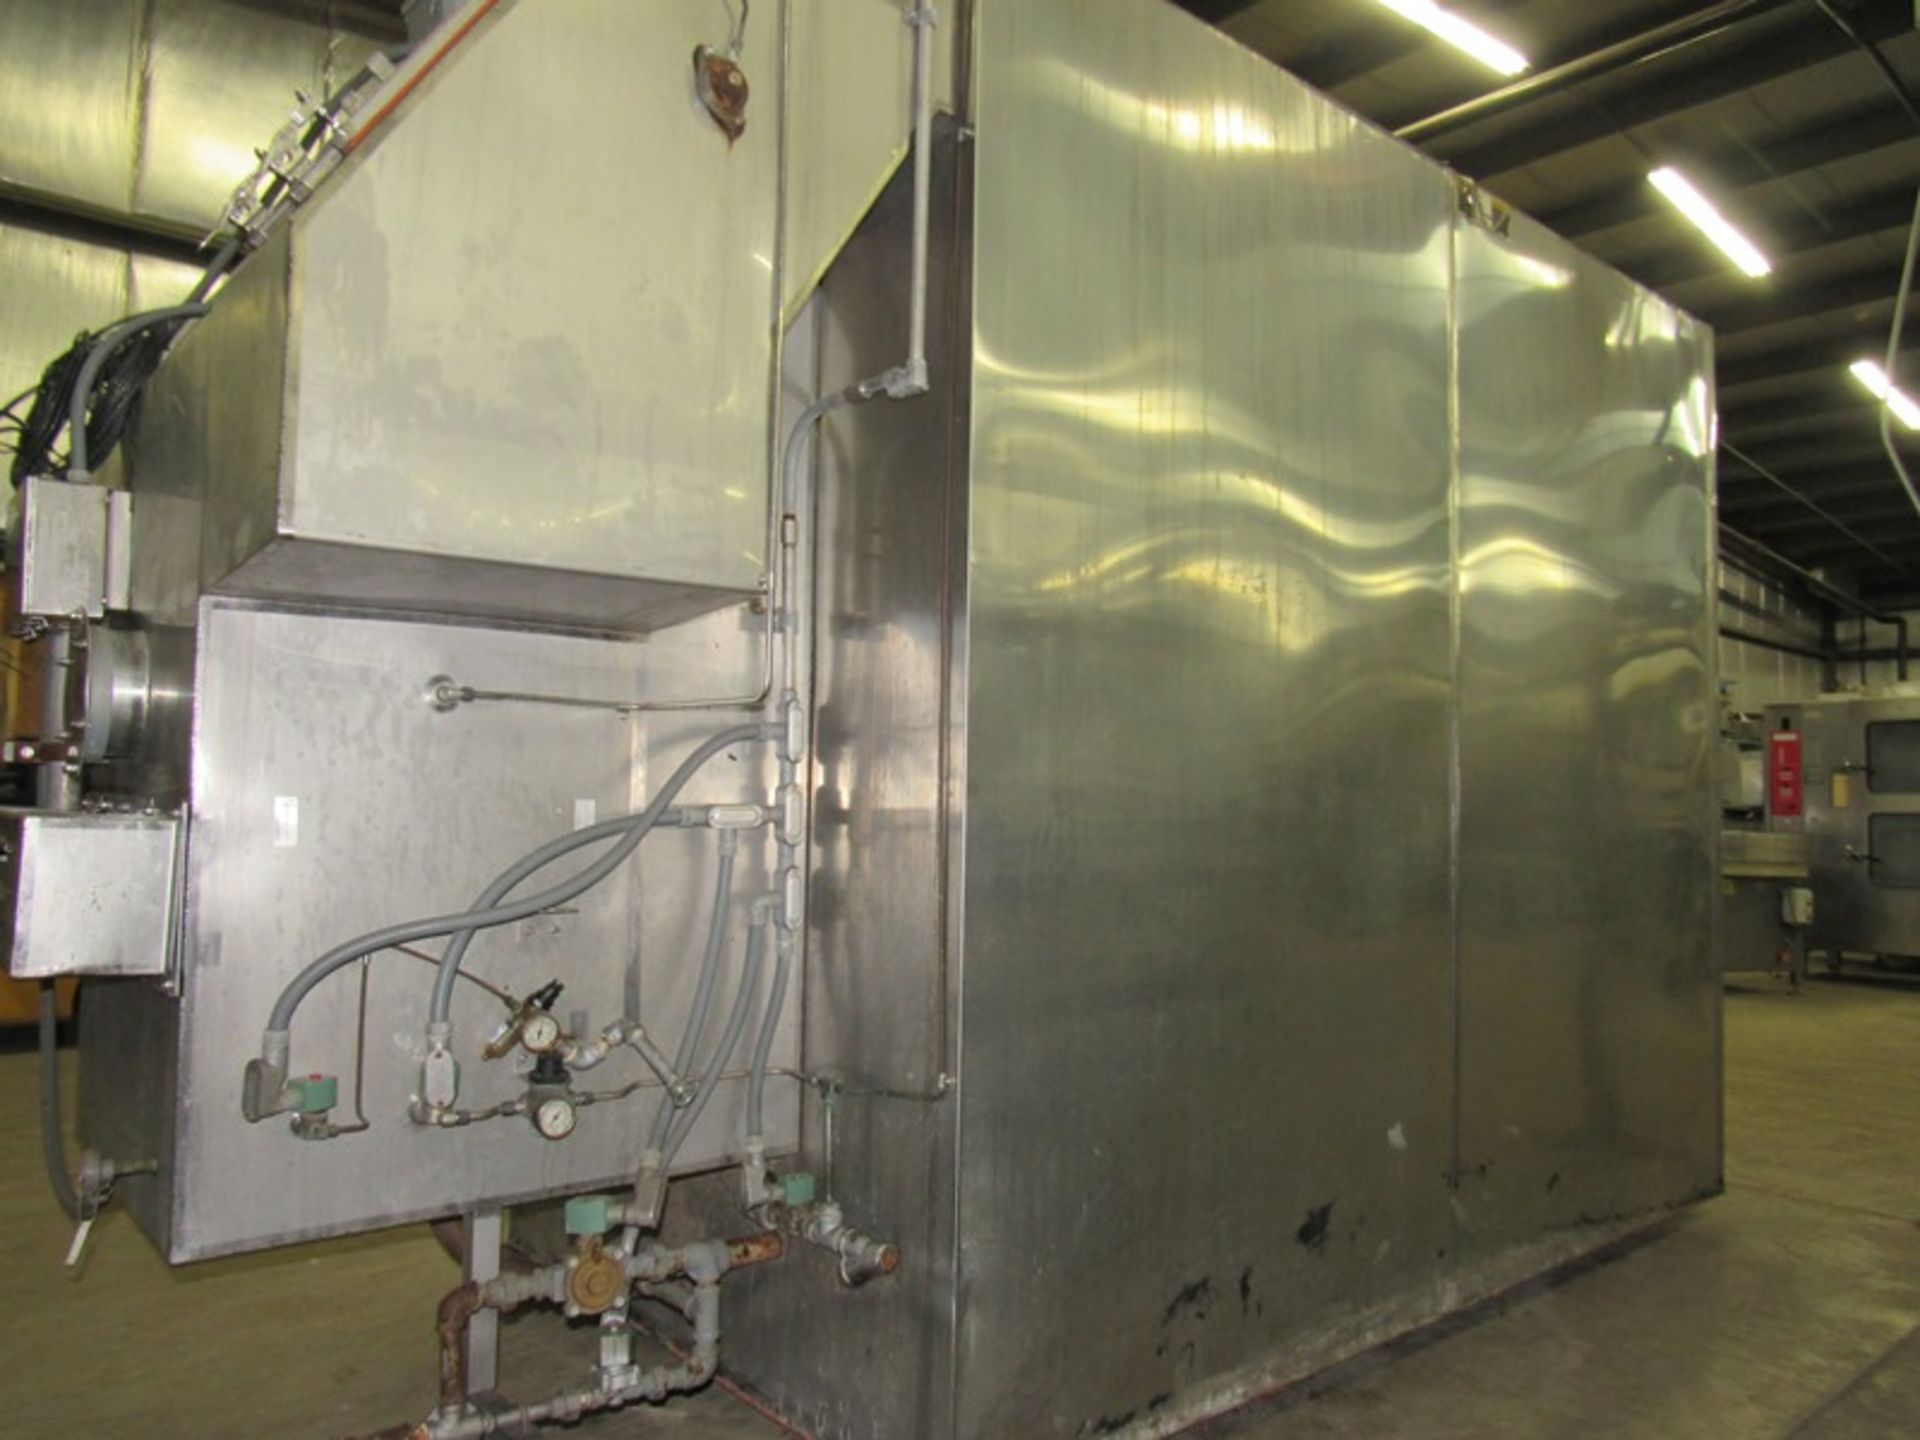 Alkar Stainless Steel Electric Fired 2-Truck Oven with shower, 4' W X 6' T door opening, 44" W - Image 4 of 24